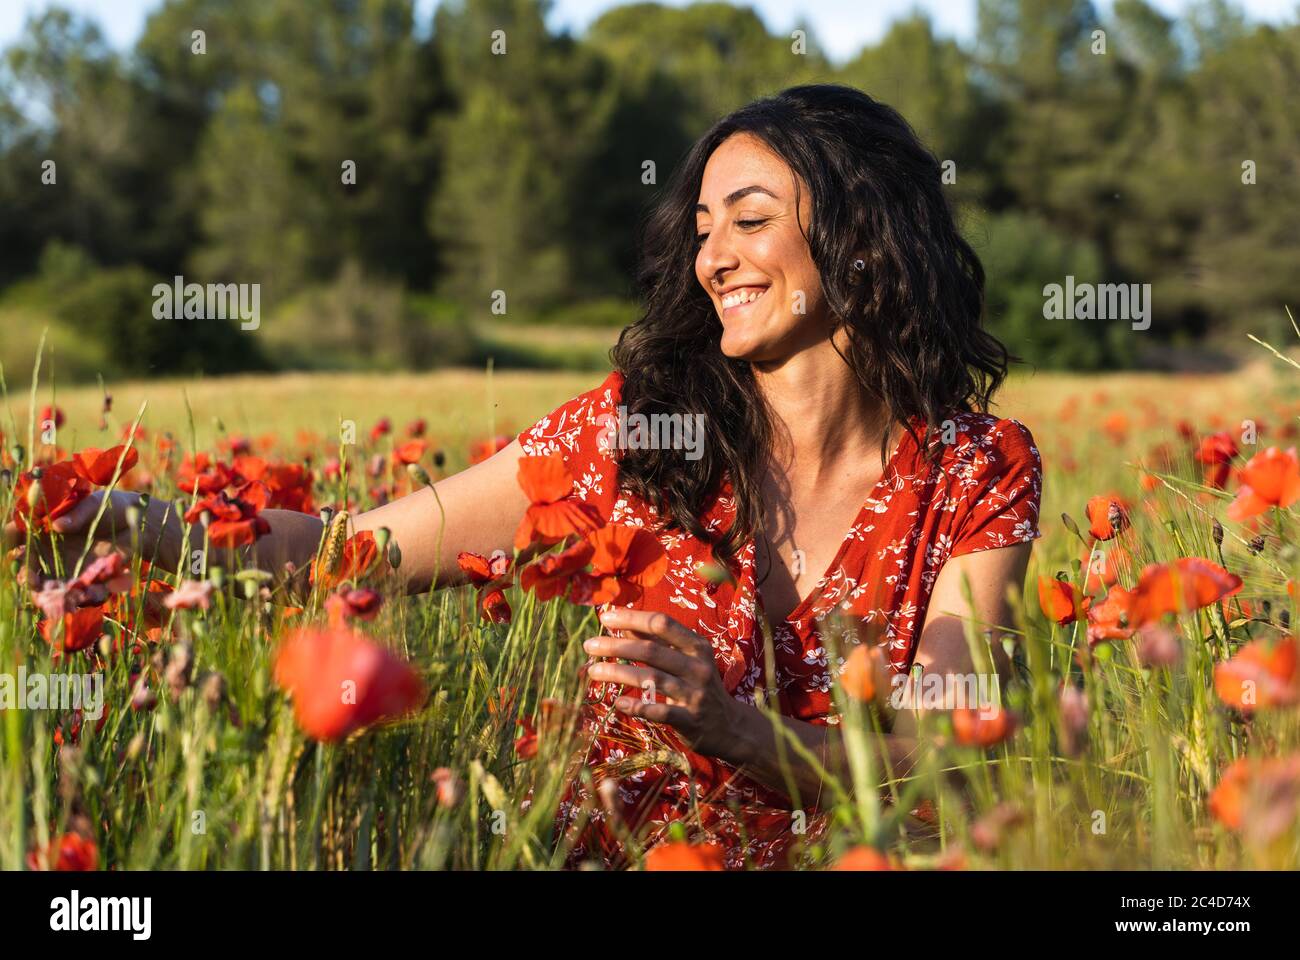 Young brunette woman in a red dress with prints crouched in the middle of a field of poppies touching the flowers while smiling Stock Photo